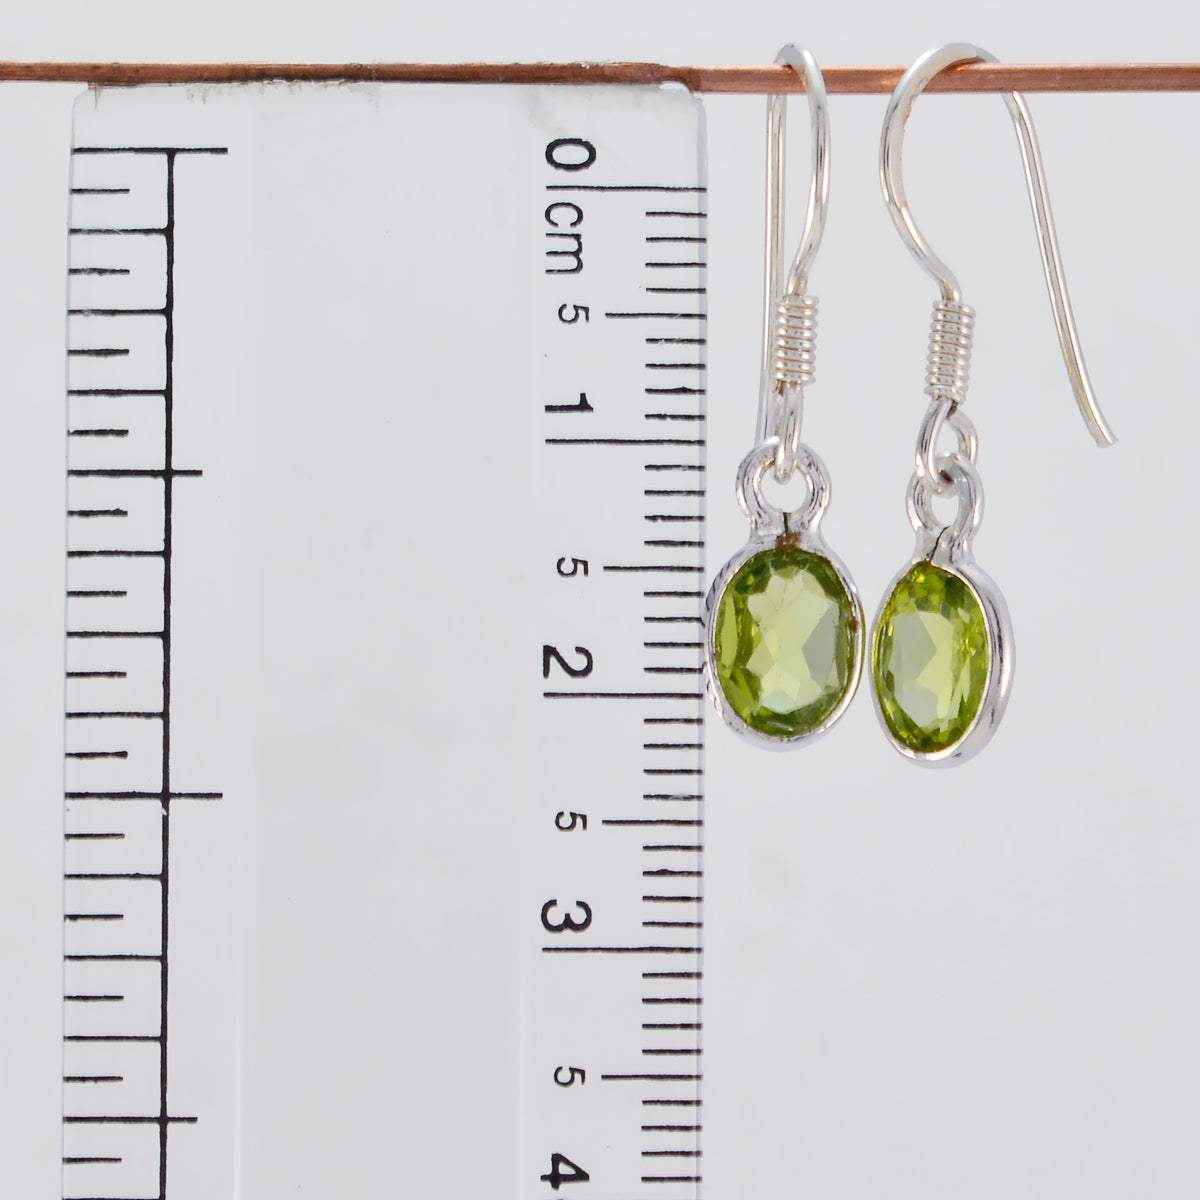 Riyo Natural Gemstone round Faceted Green Peridot Silver Earring gift for friend